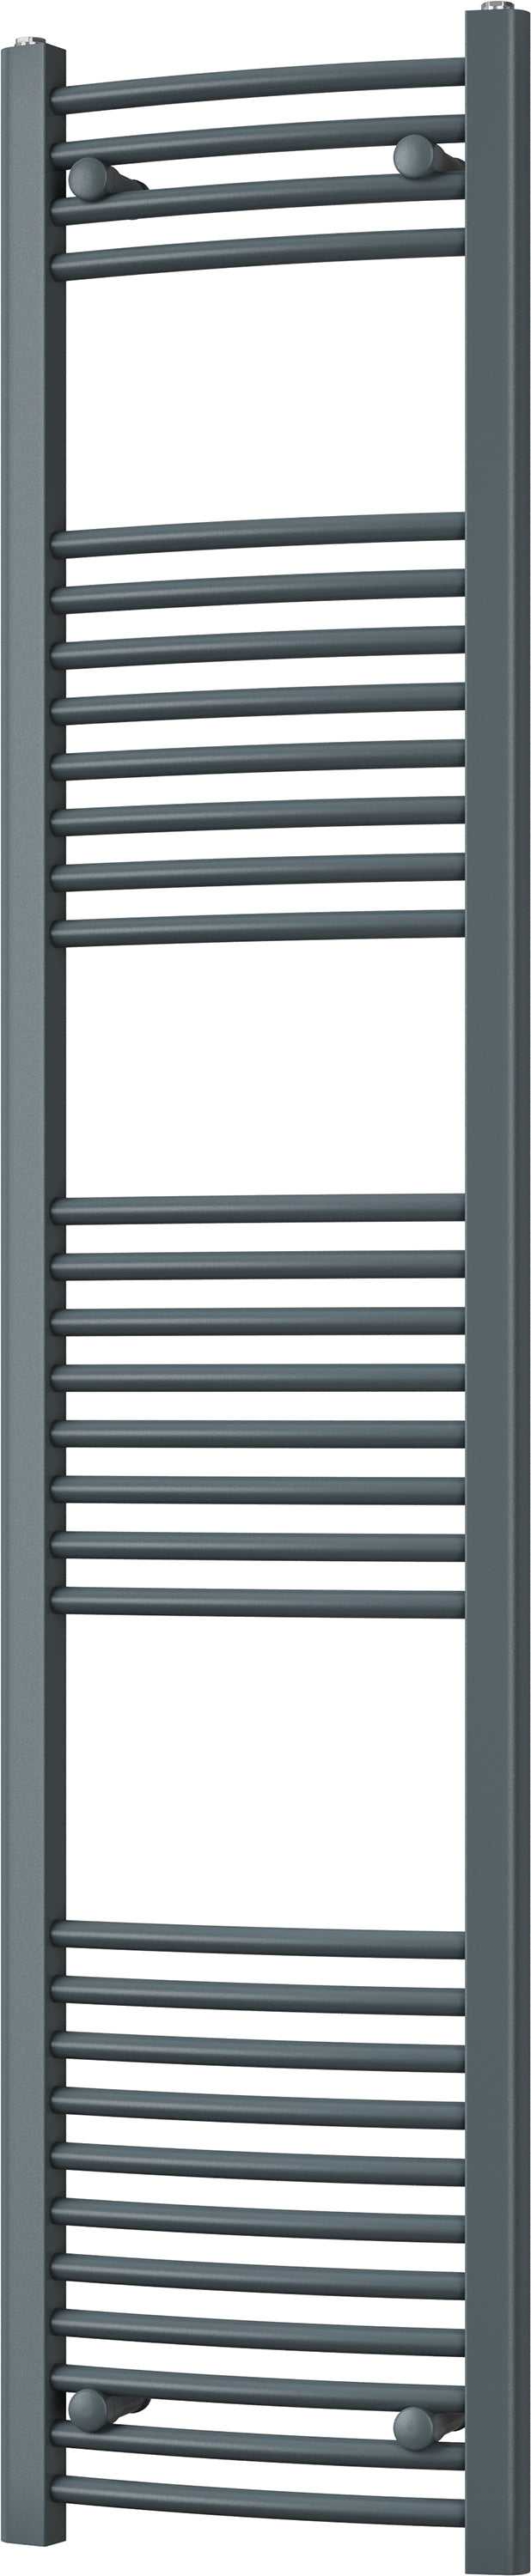 Zennor - Anthracite Heated Towel Rail - H1800mm x W400mm - Curved